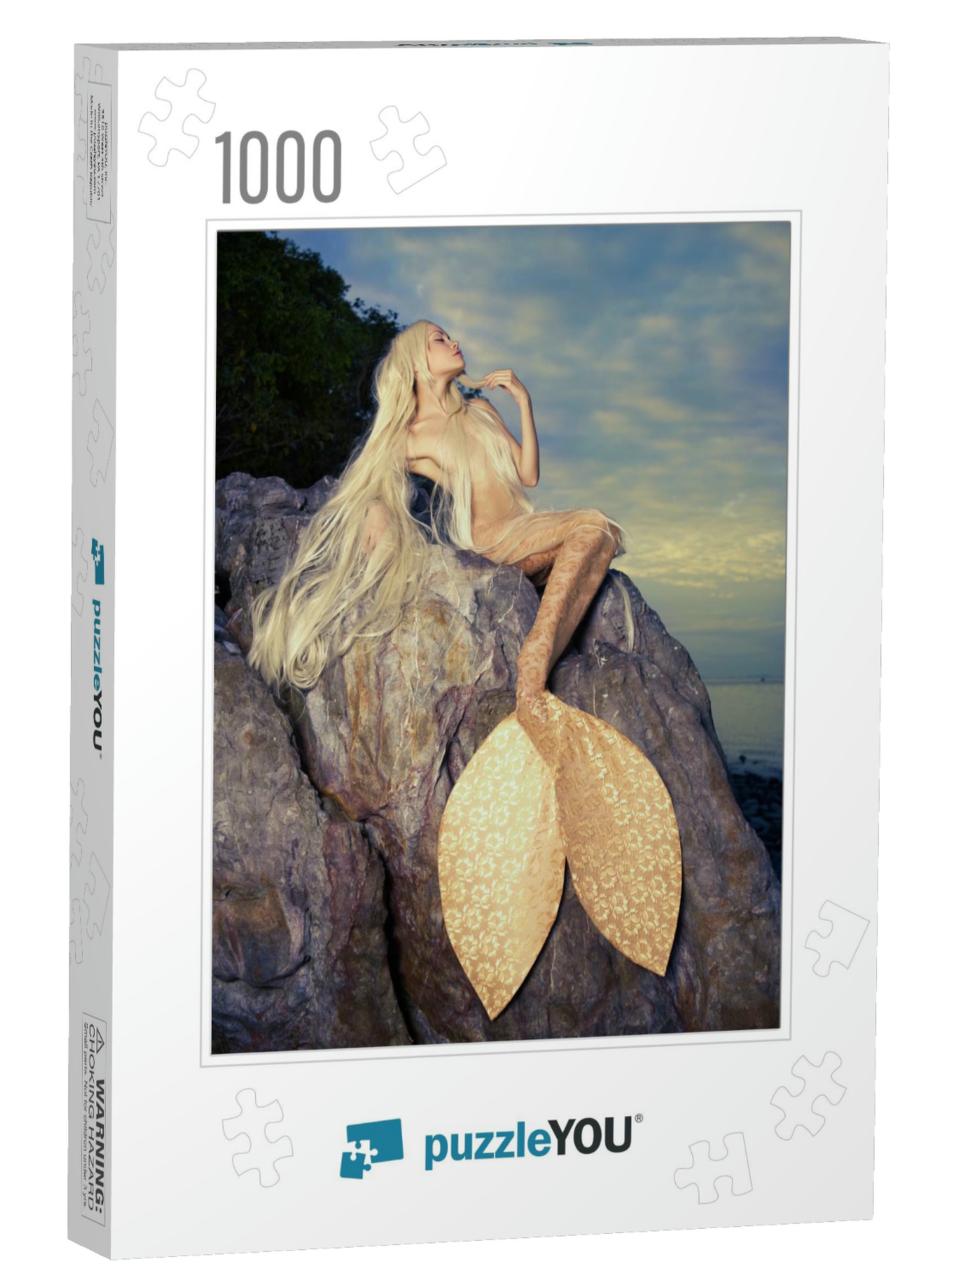 Beautiful Fashionable Mermaid Sitting on a Rock by the Se... Jigsaw Puzzle with 1000 pieces